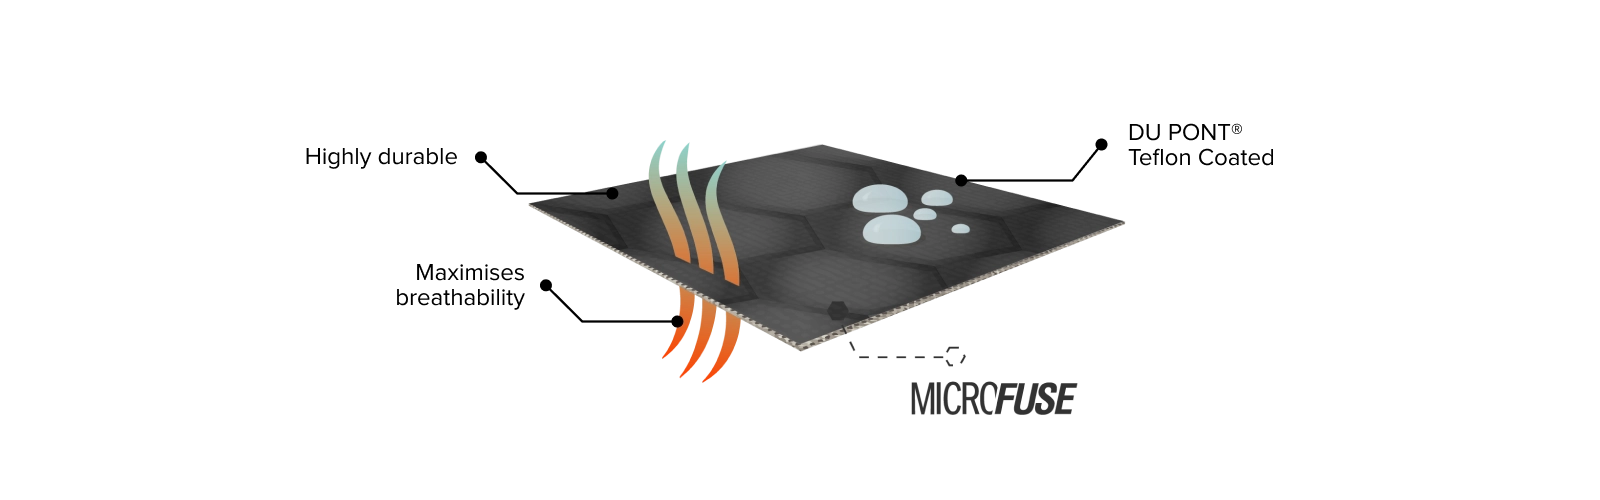 Microfuse Technology